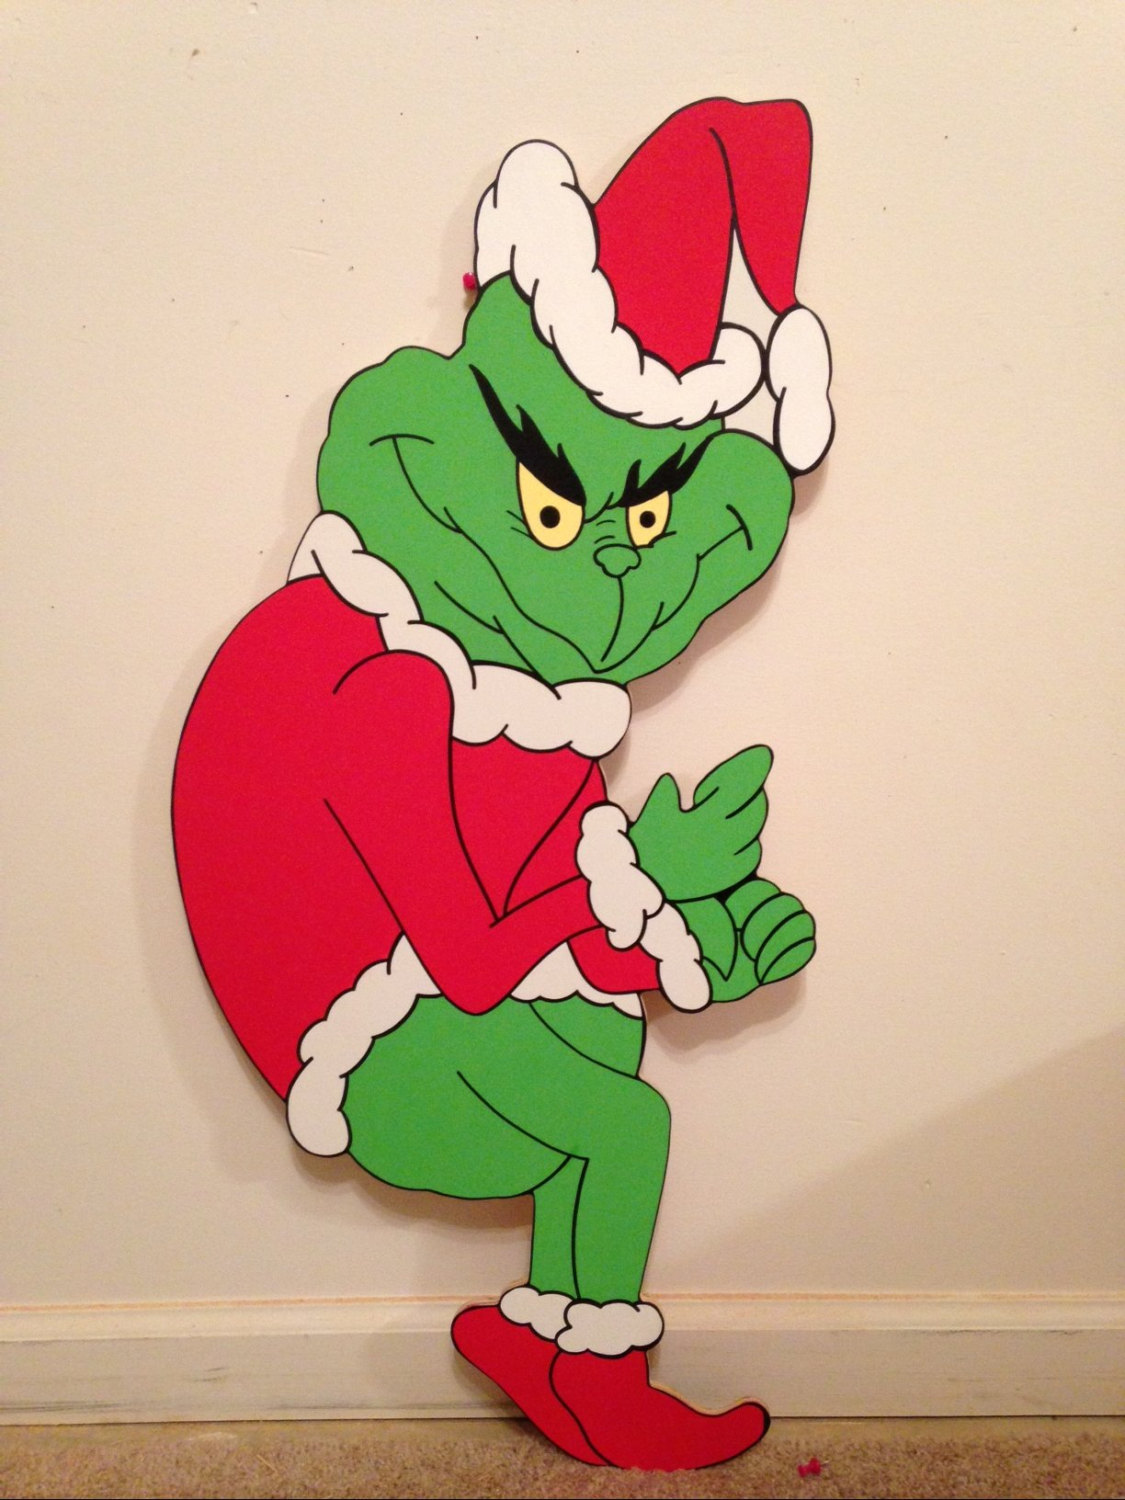  The Grinch Decorations For Christmas 